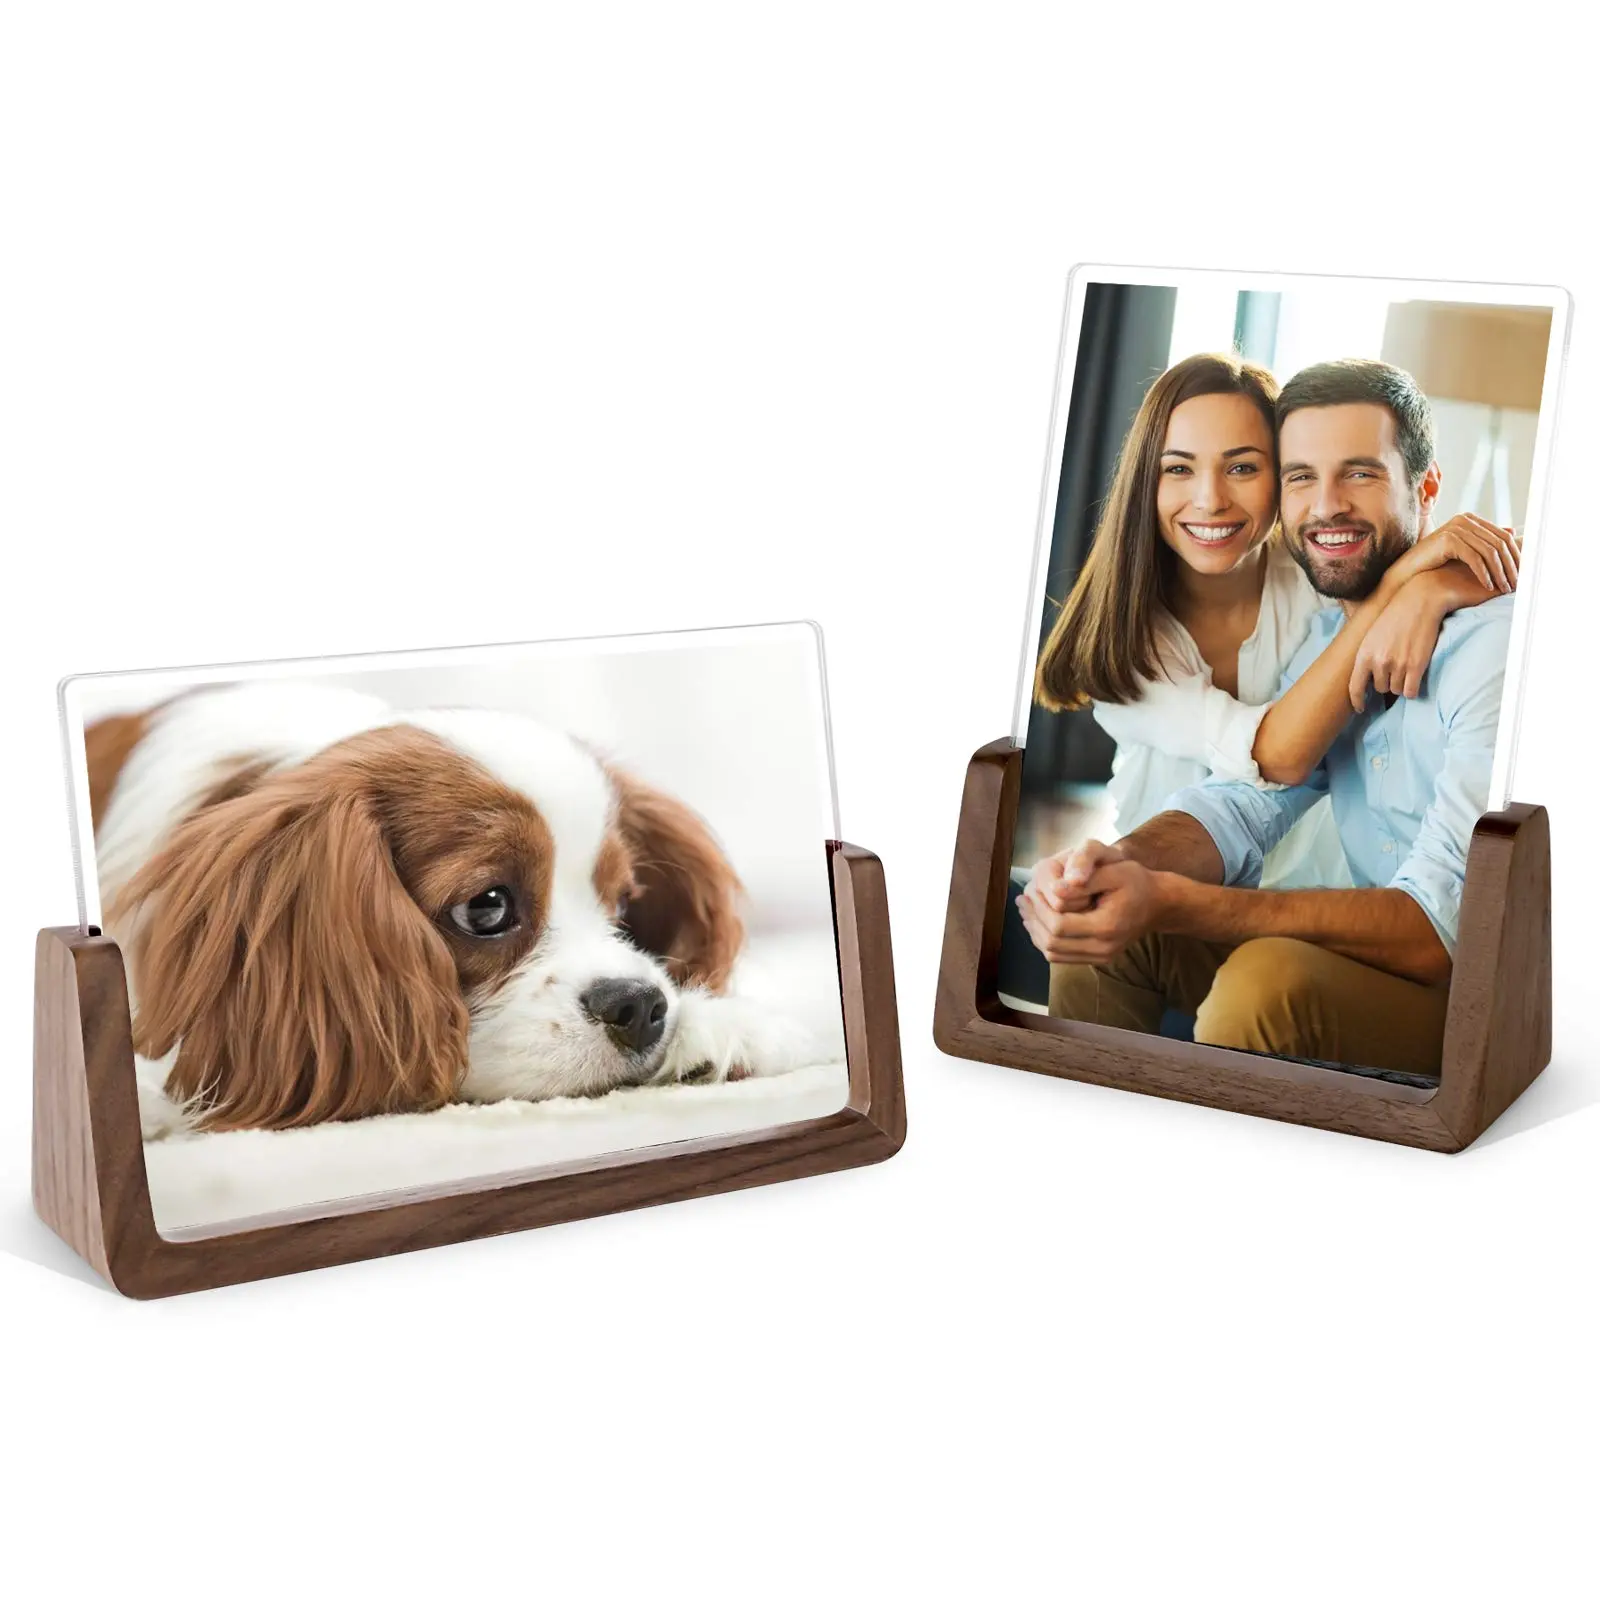 4x6 inch Photo Frames with Walnut Wood Base and High Definition Break Free Acrylic Glass Covers Rustic Wooden Picture Frame